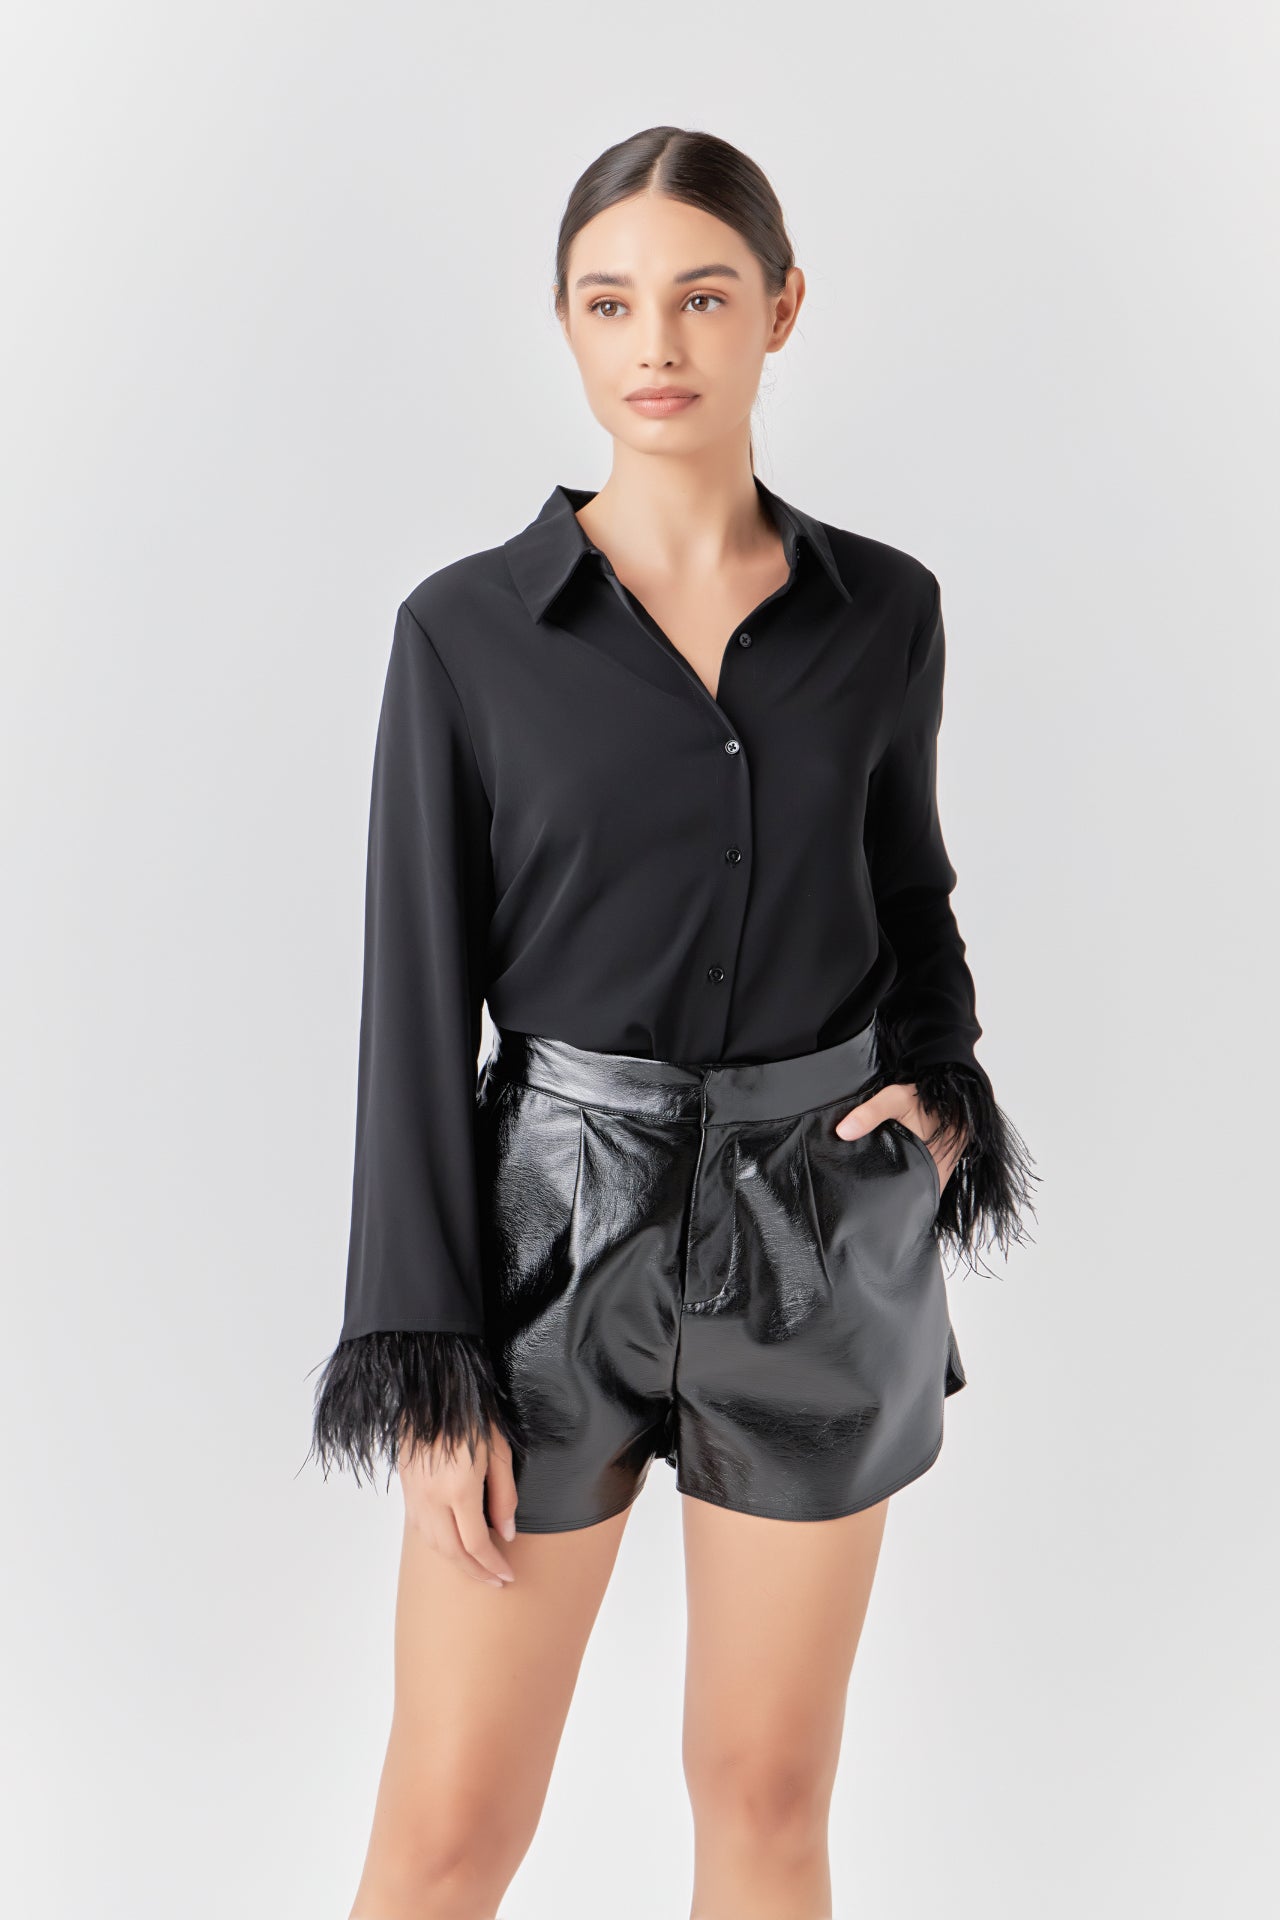 ENDLESS ROSE - Feather Trimmed Fitted Blouse Top - TOPS available at Objectrare